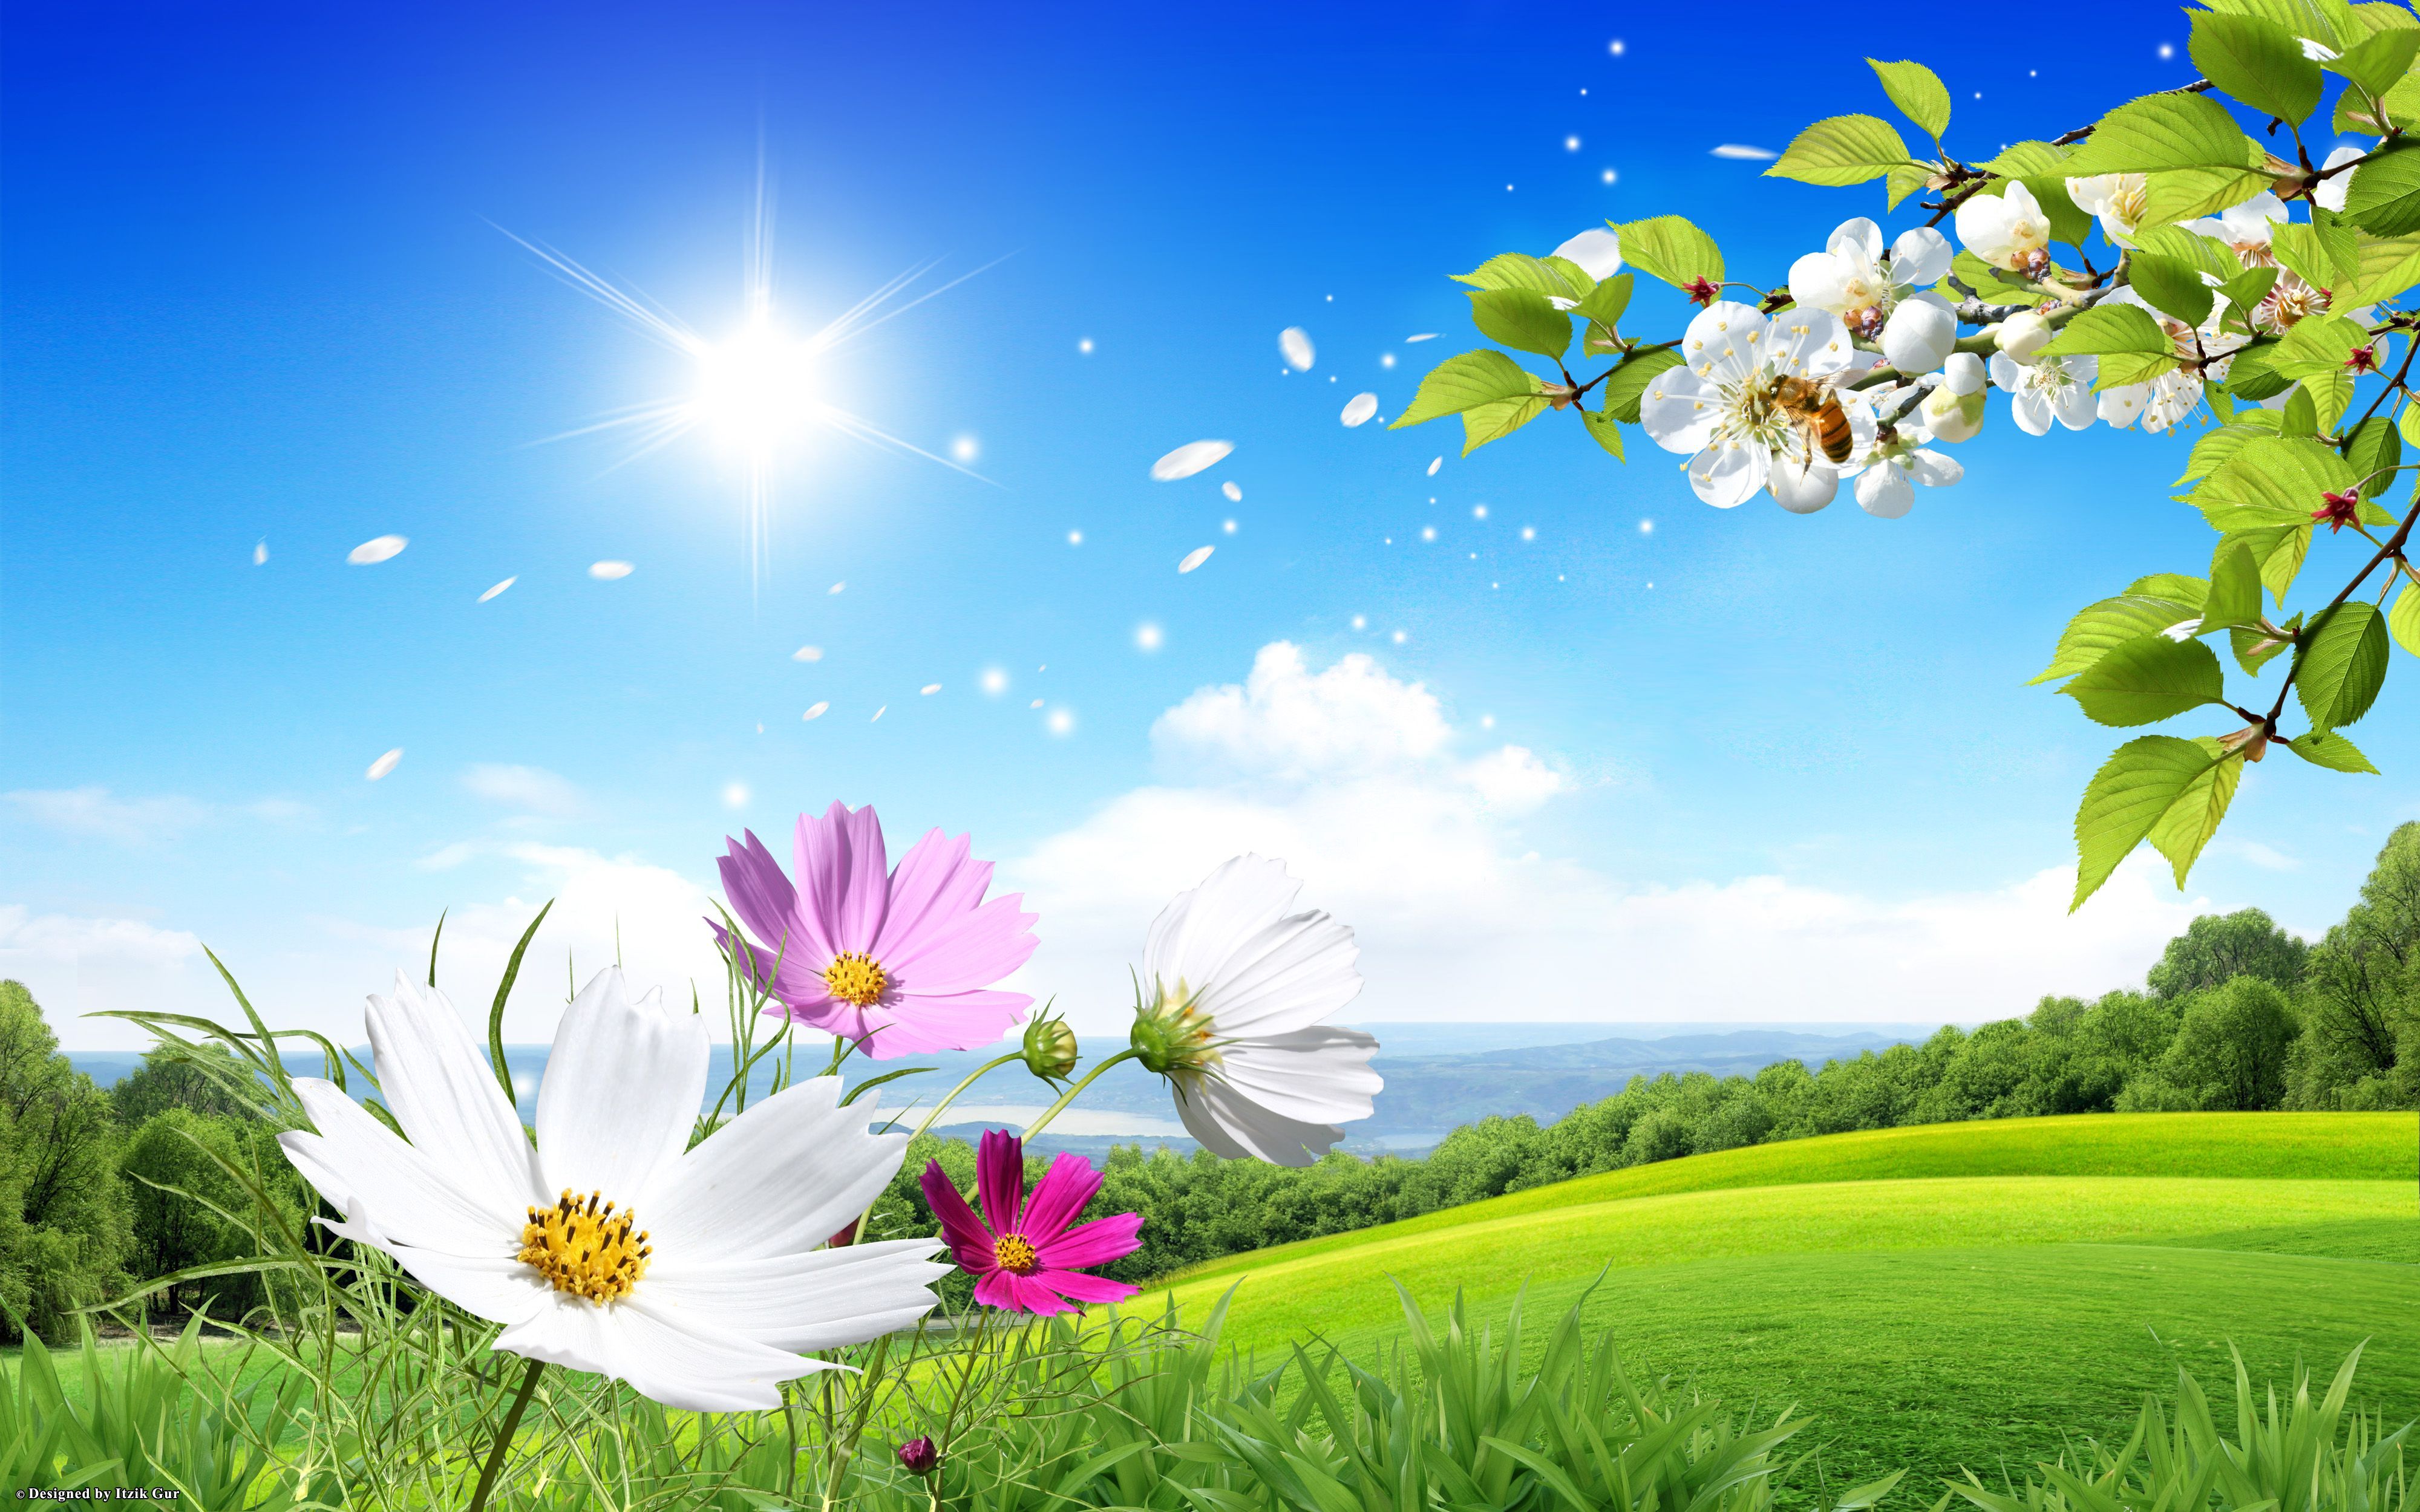 Spring Wallpapers HD – Spring Images For Background 2014 | WooInfo